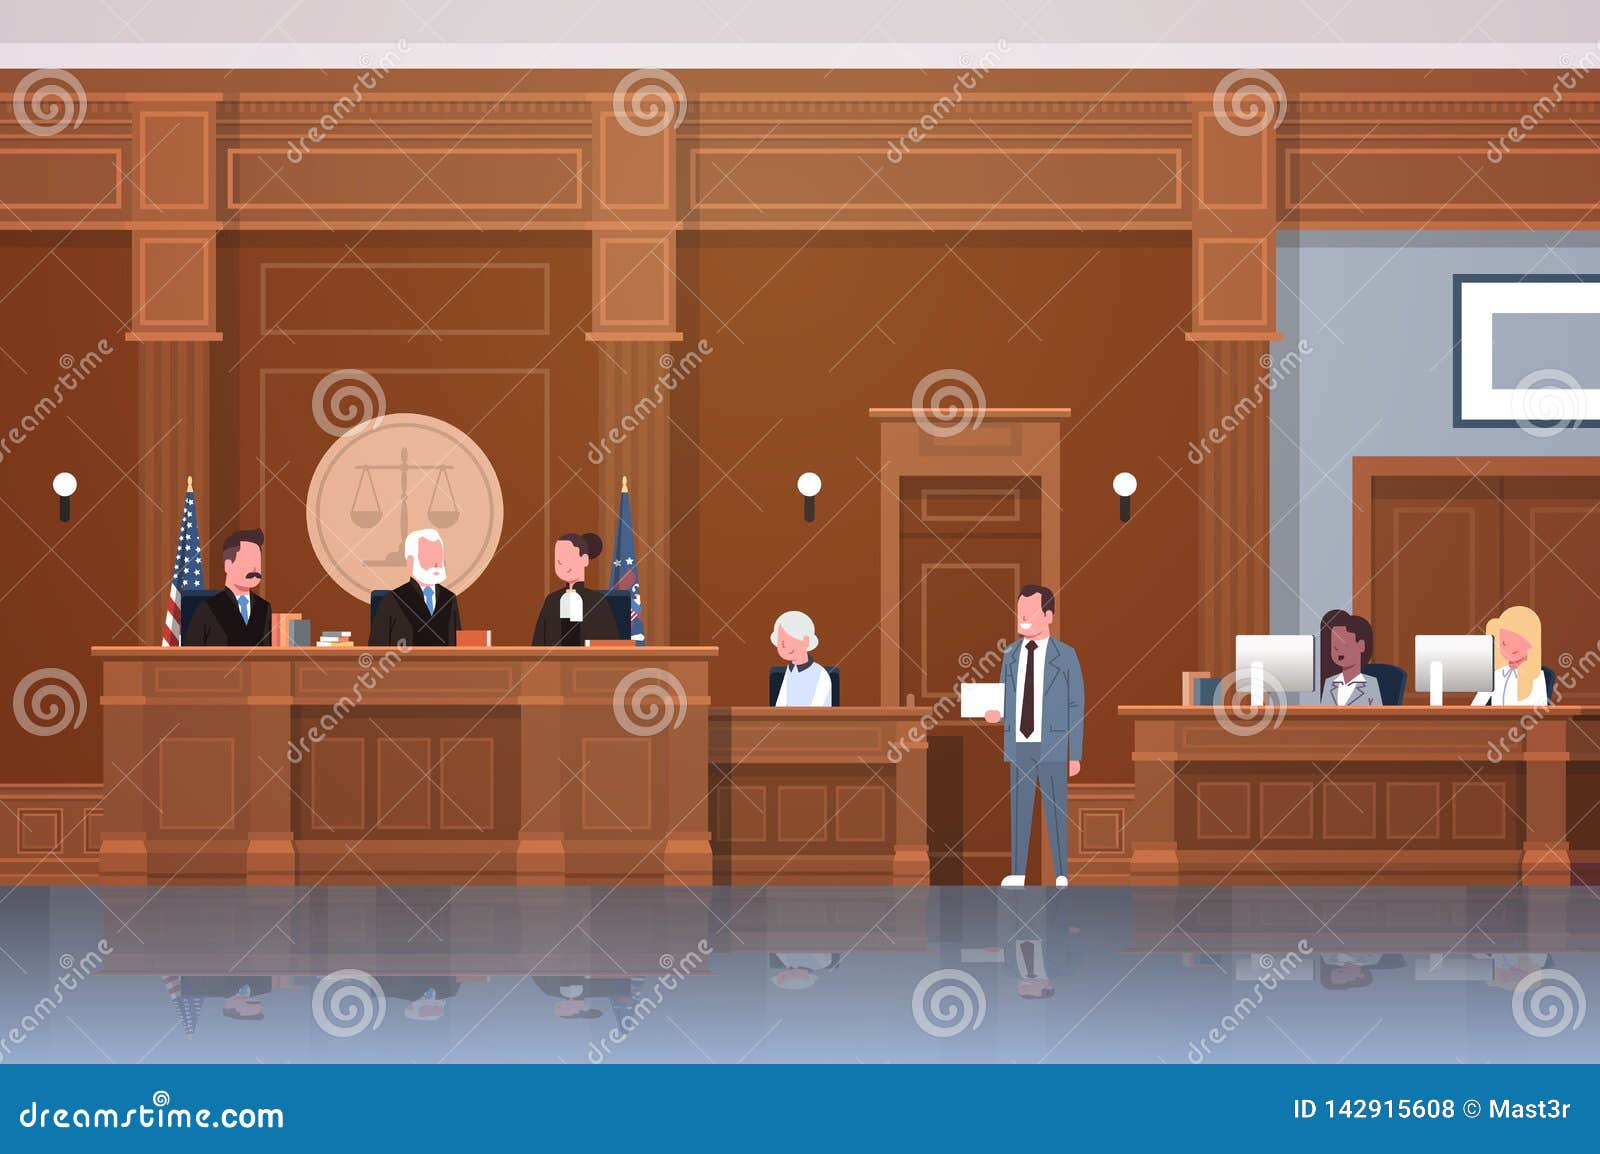 Law Process With Judge Secretary Suspect And Lawyer Or Attorney Giving